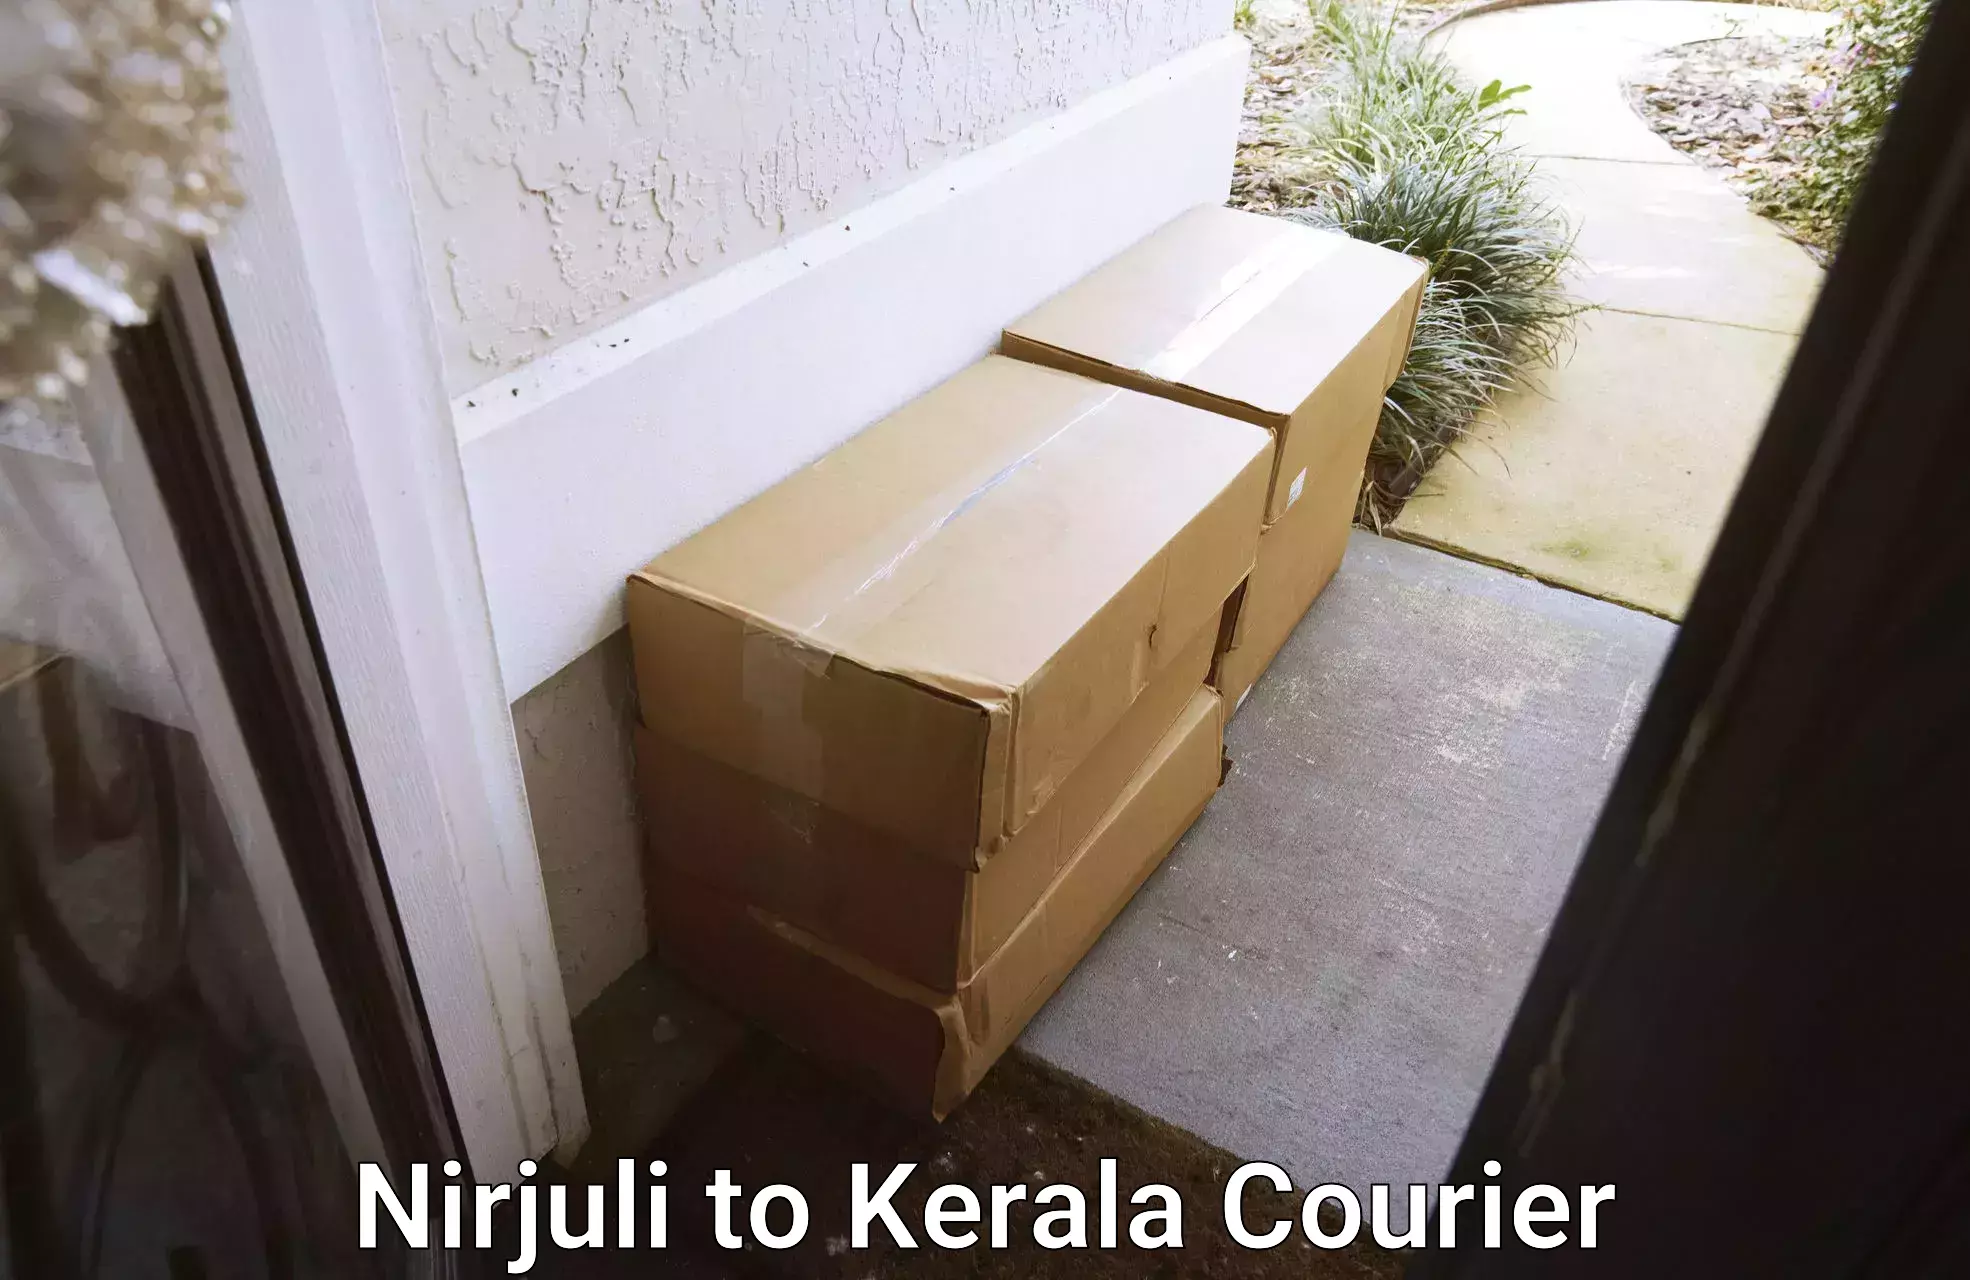 Optimized delivery routes Nirjuli to Alathur Malabar